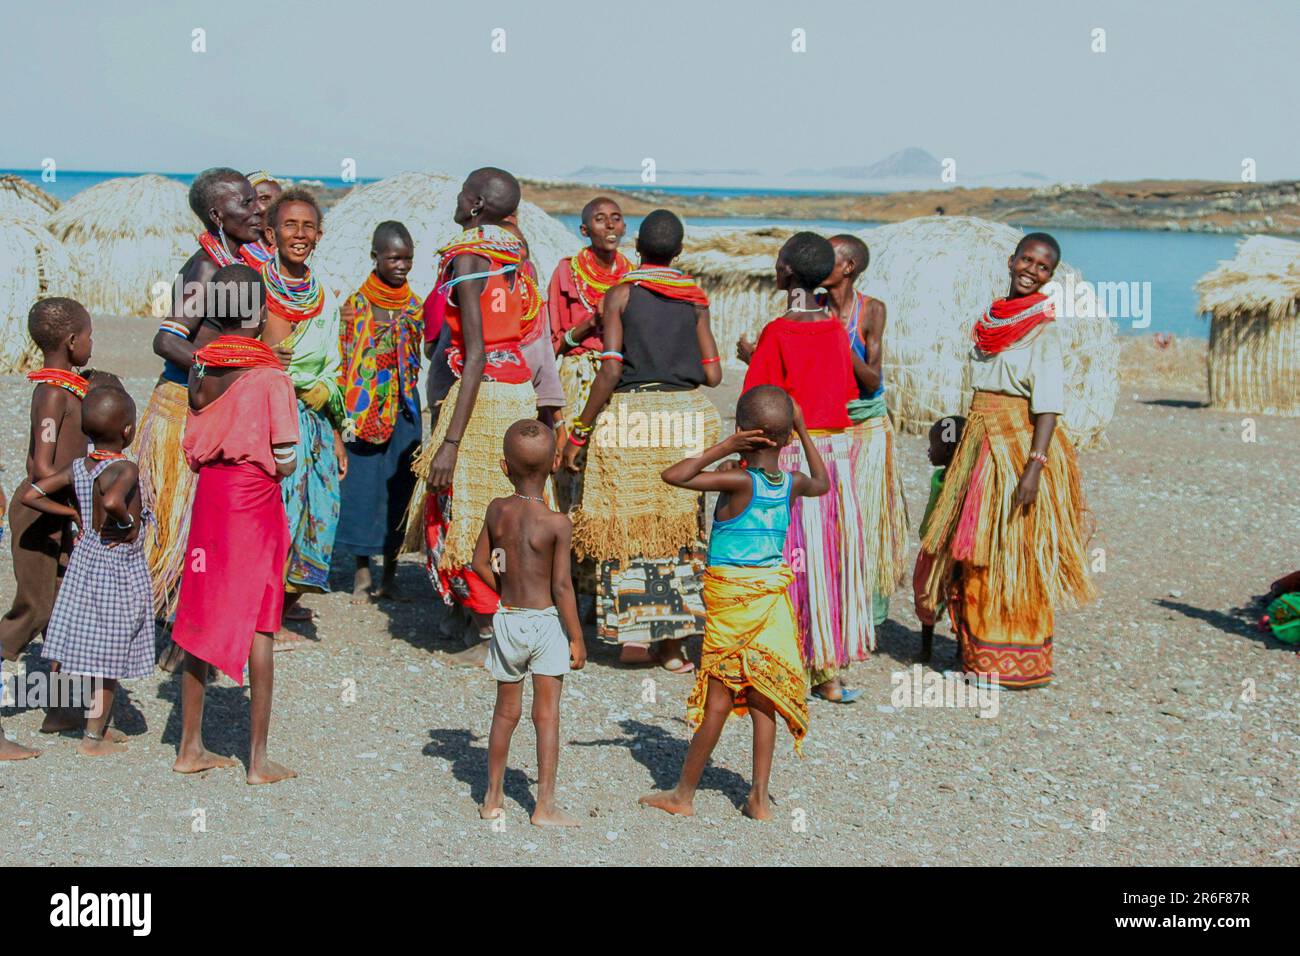 El Molo is a village in Kenya, situated on the southeast shore of Lake Turkana, Its population is about 200. The tiny population fishes the lake for g Stock Photo